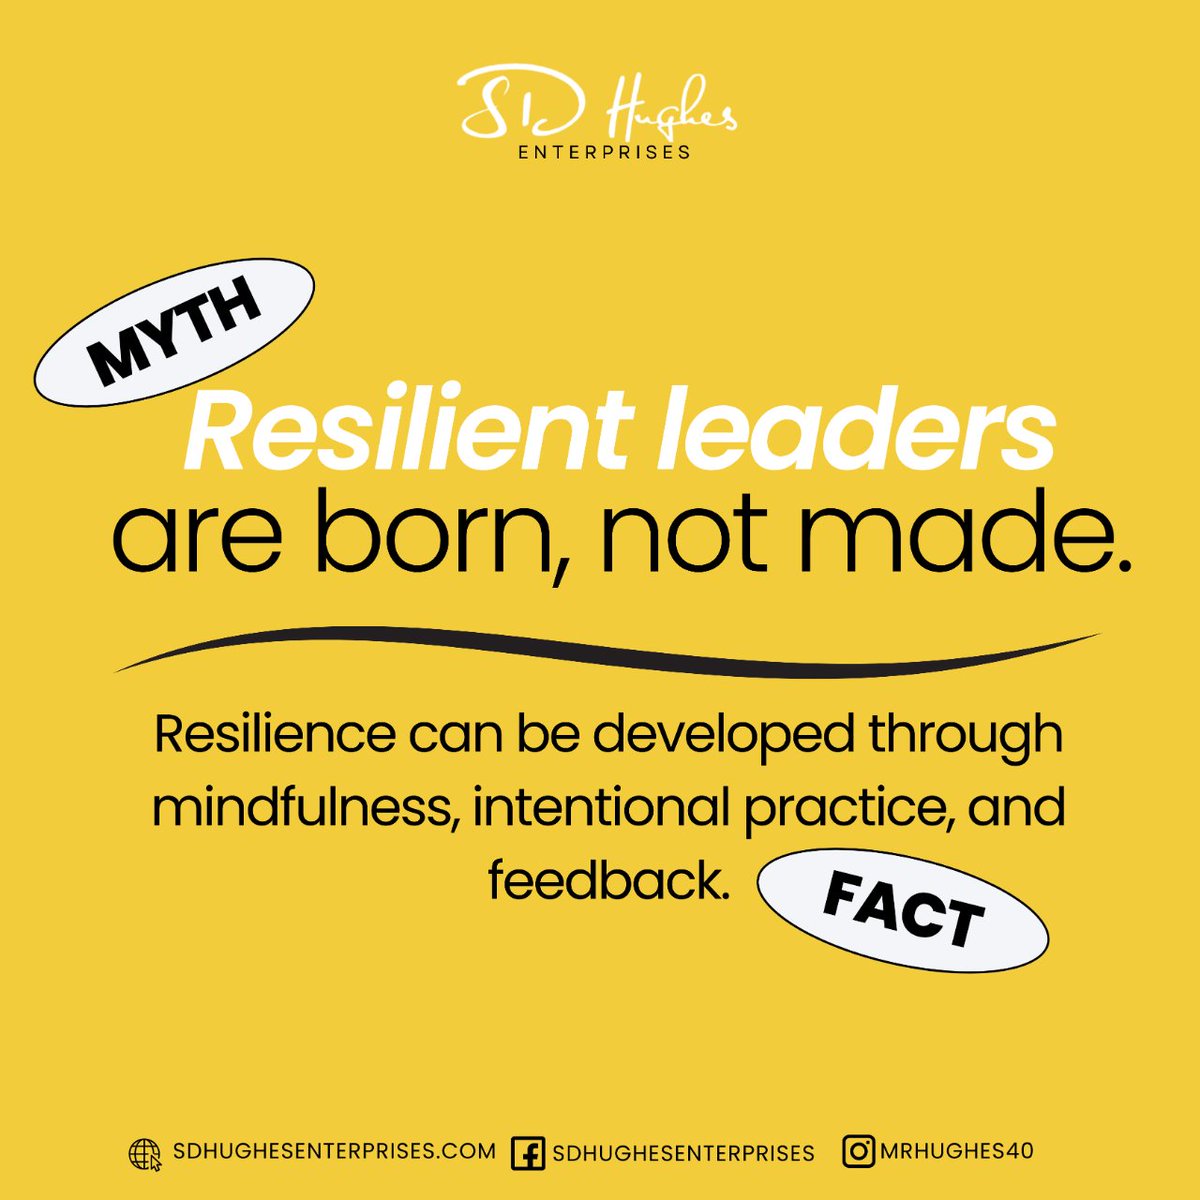 Your journey to resilient leadership starts here.

#TrueResilience #LeadershipEvolved #resilience #leadership